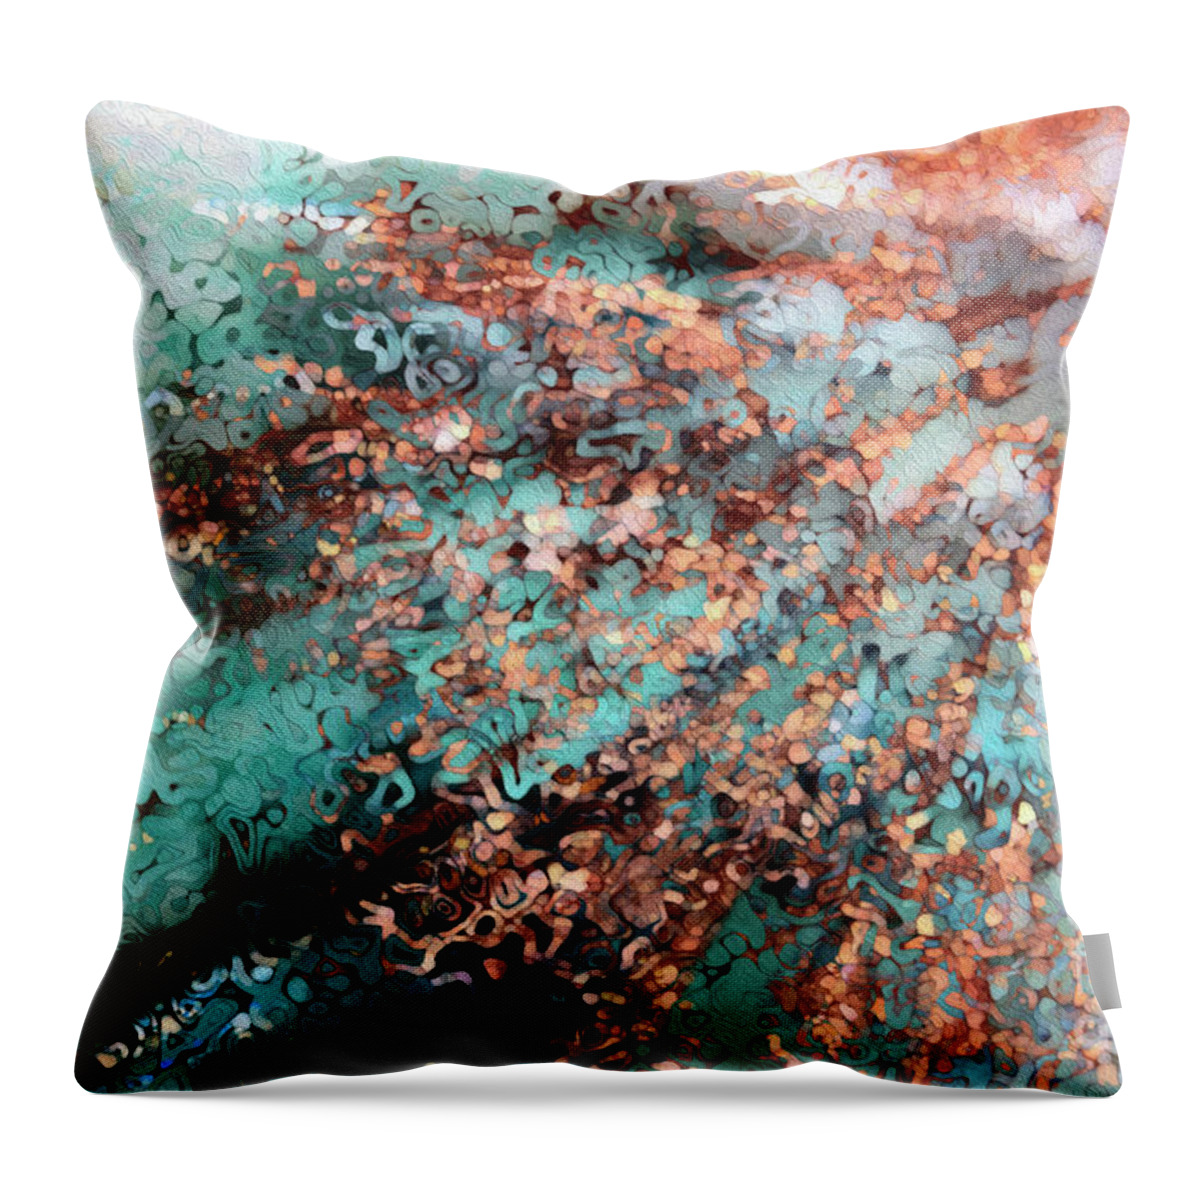 Blue Throw Pillow featuring the painting Romans 10 9. Confess And Believe. by Mark Lawrence